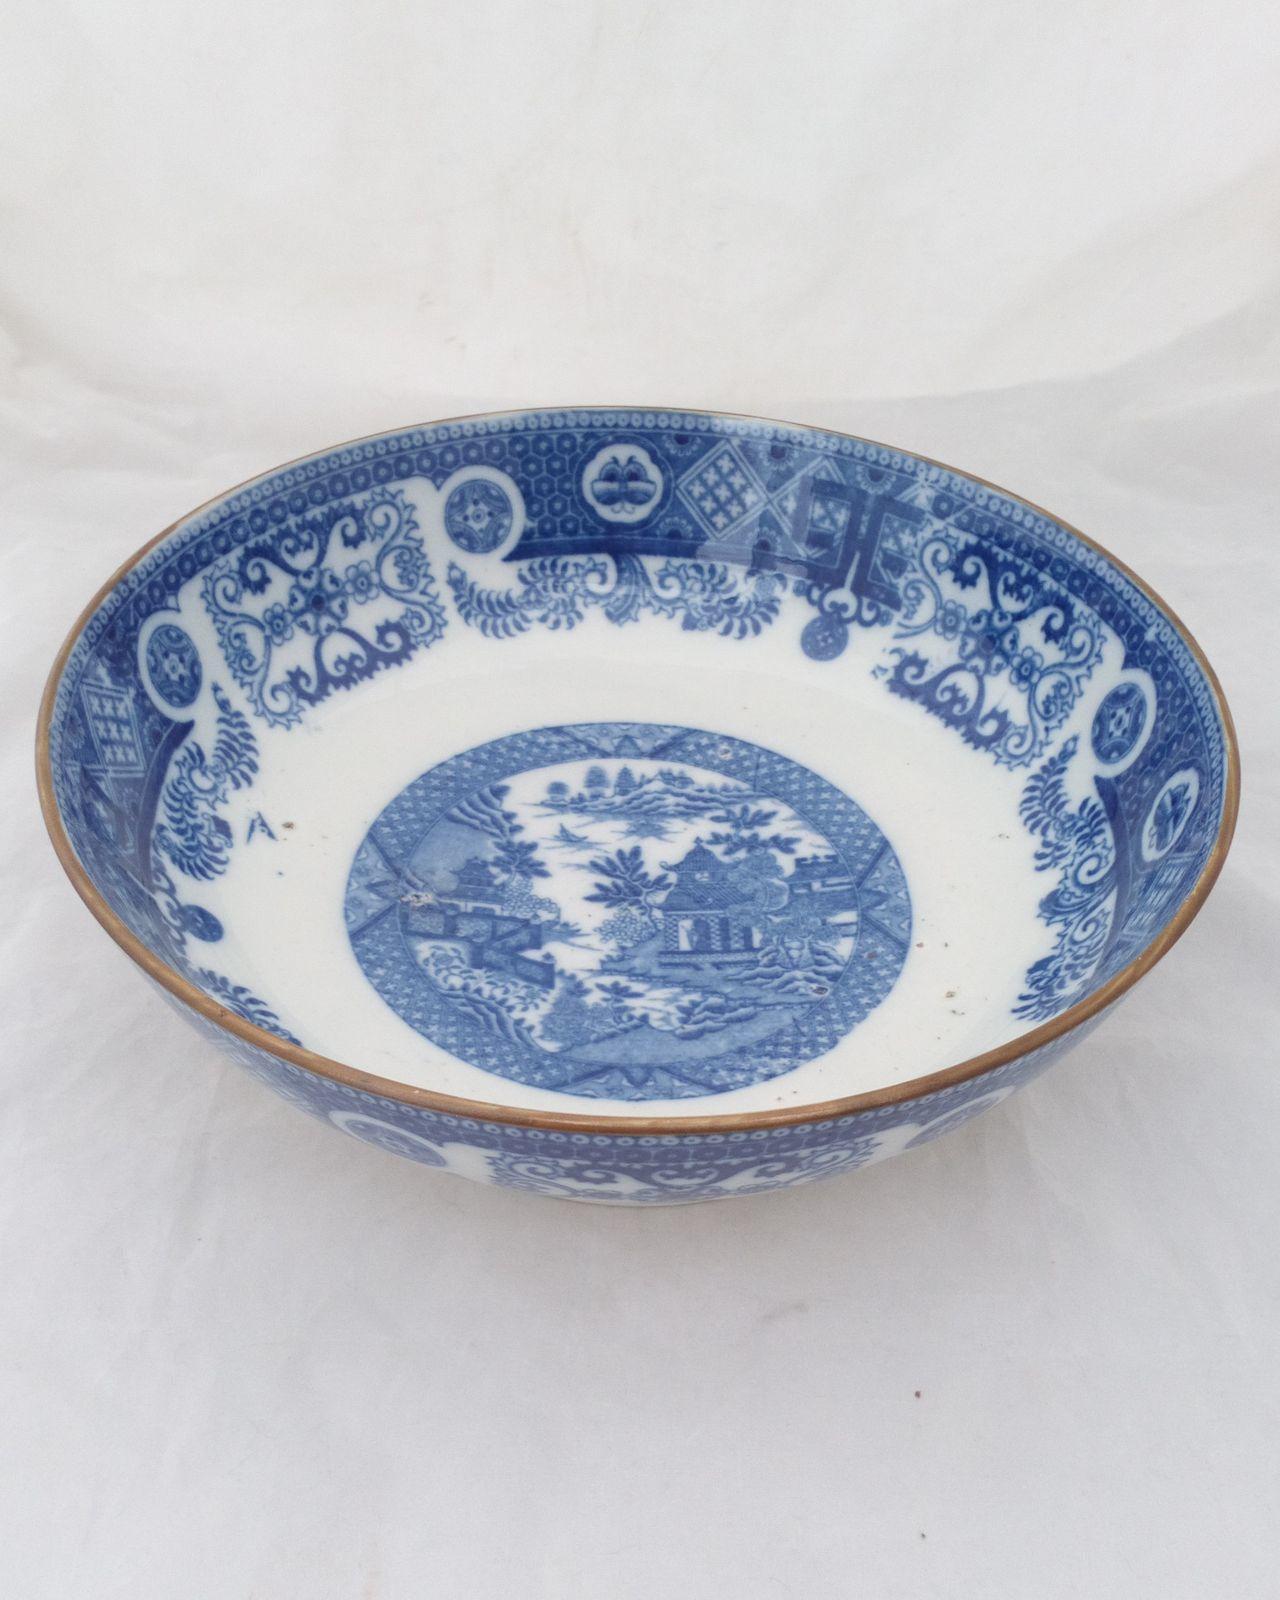 Antique Cambrian Pottery Blue & White Transfer Printed Pearlware Bowl decorated with the Bridgeless Chinoiserie or Hermit Pattern circa 1800